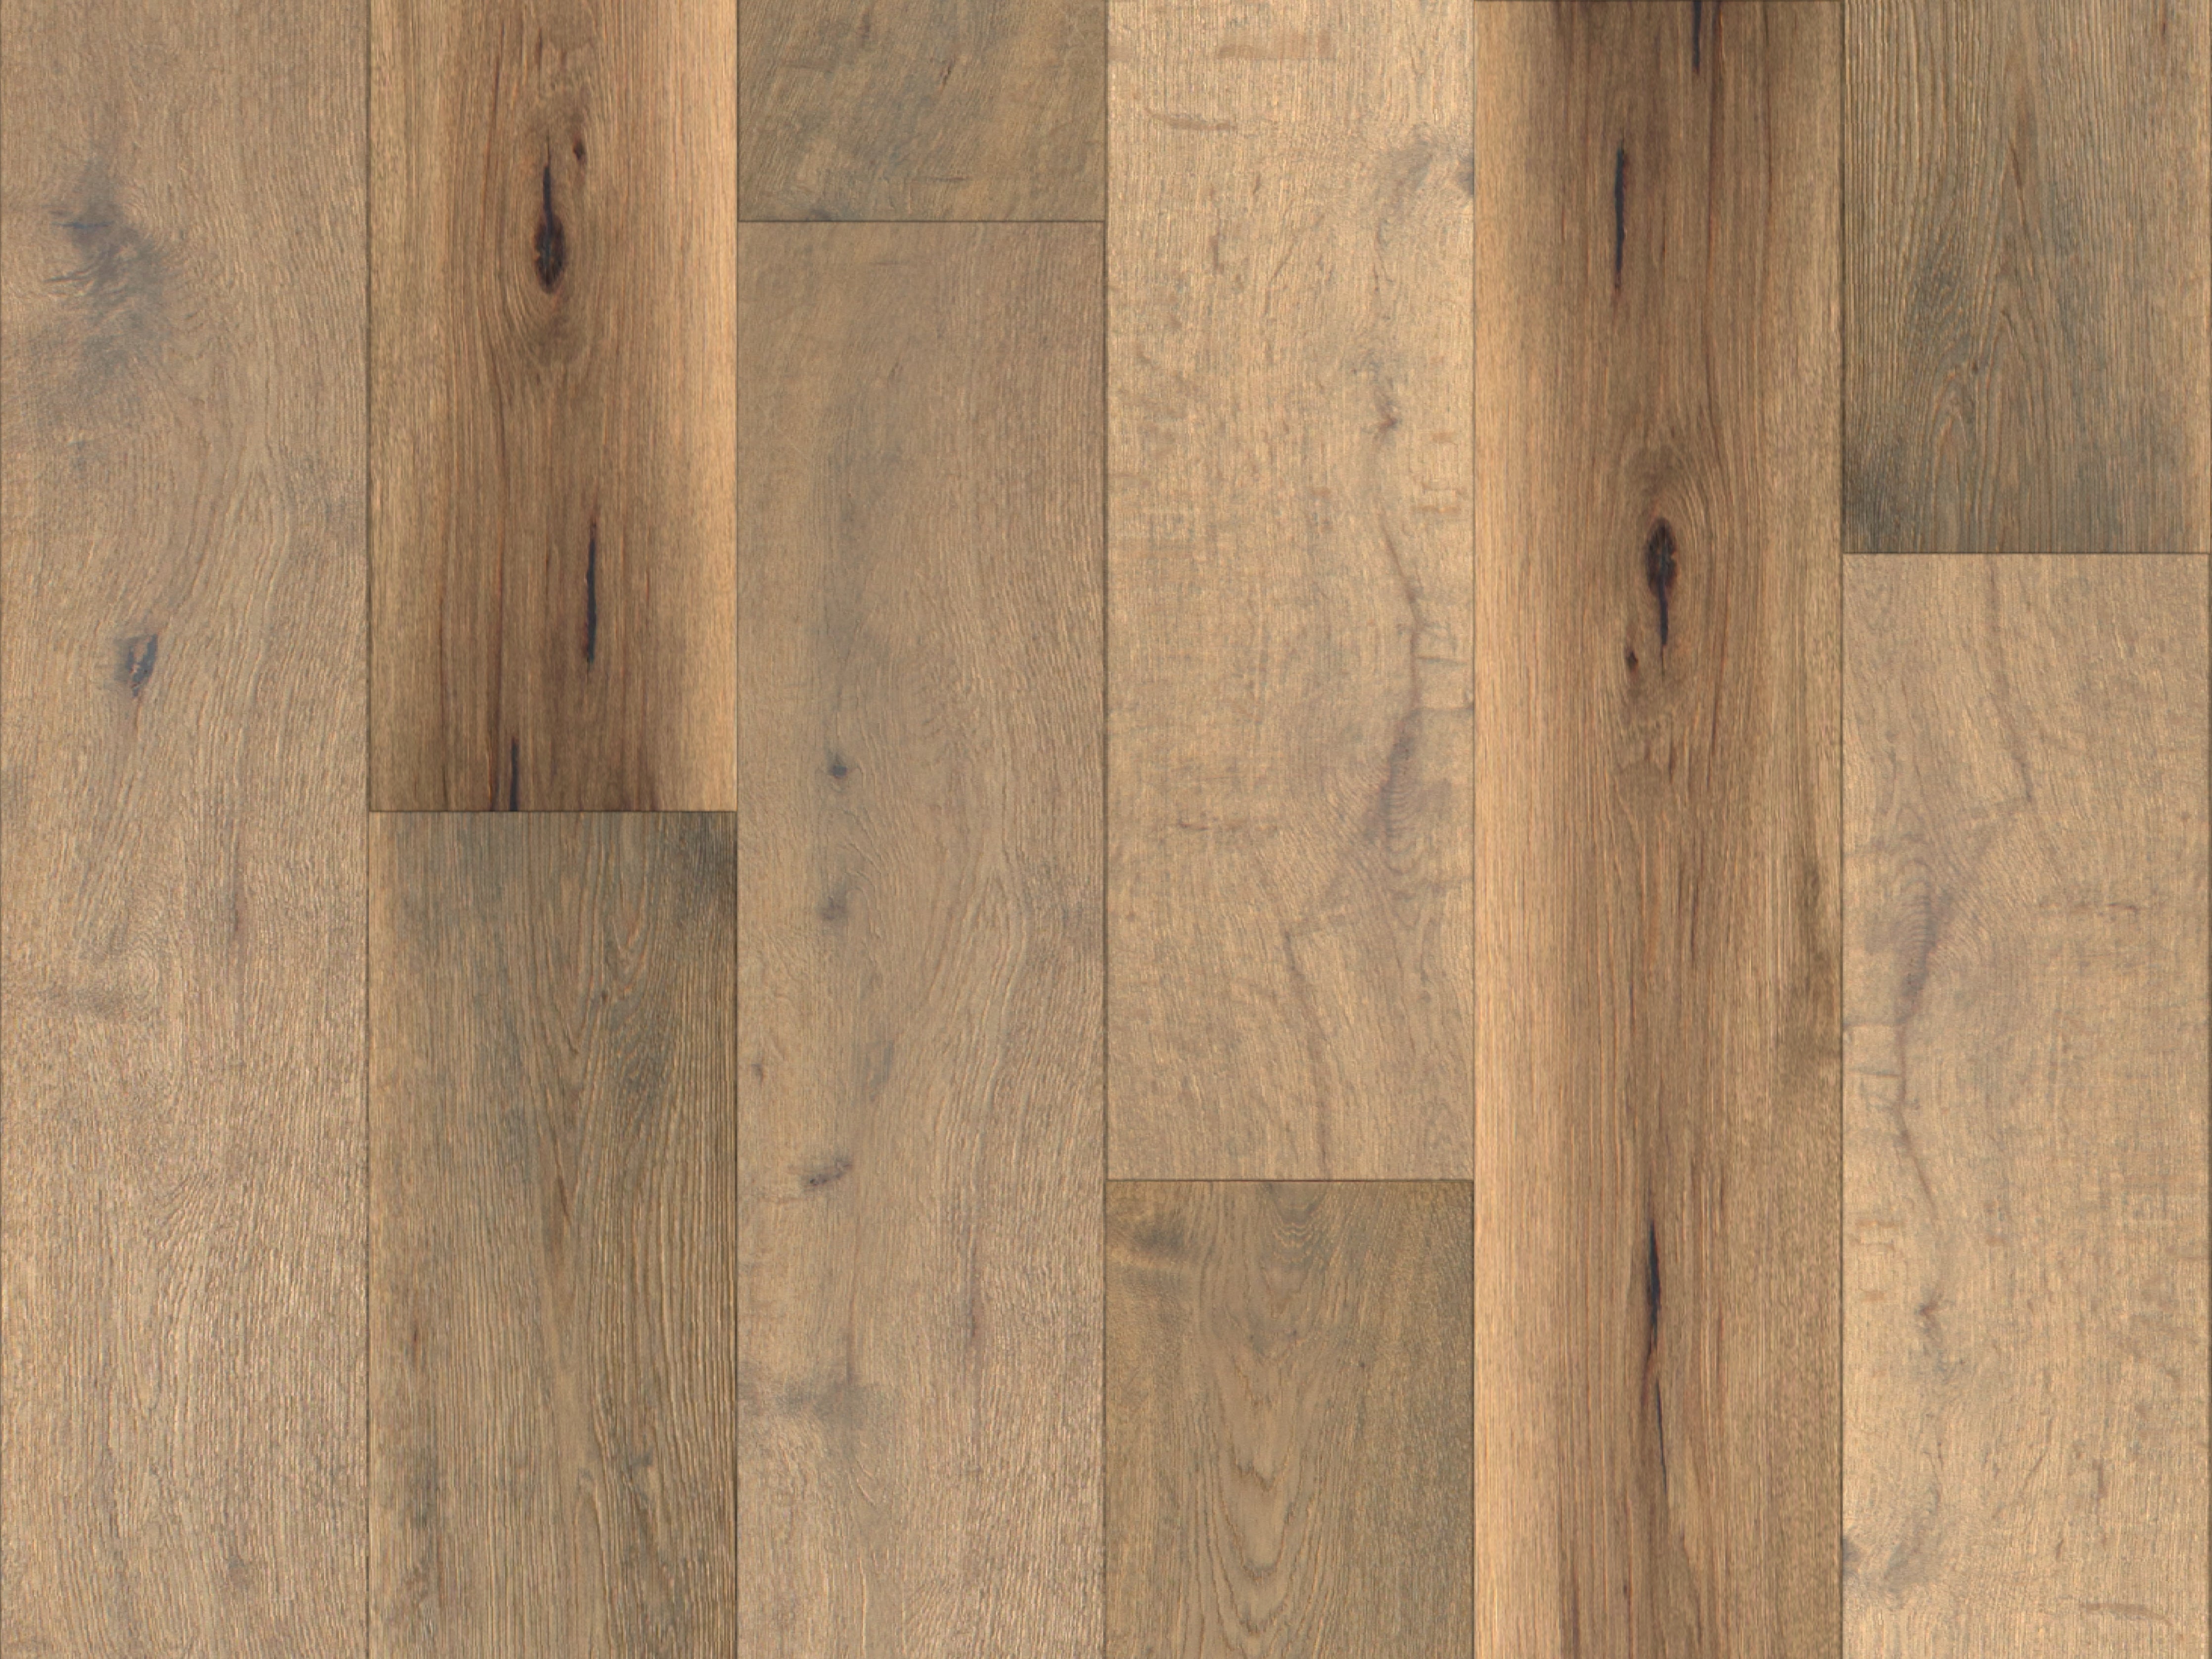 duchateau signature chateau bravone european oak engineered hardnatural wood floor uv oil finish for interior use distributed by surface group international